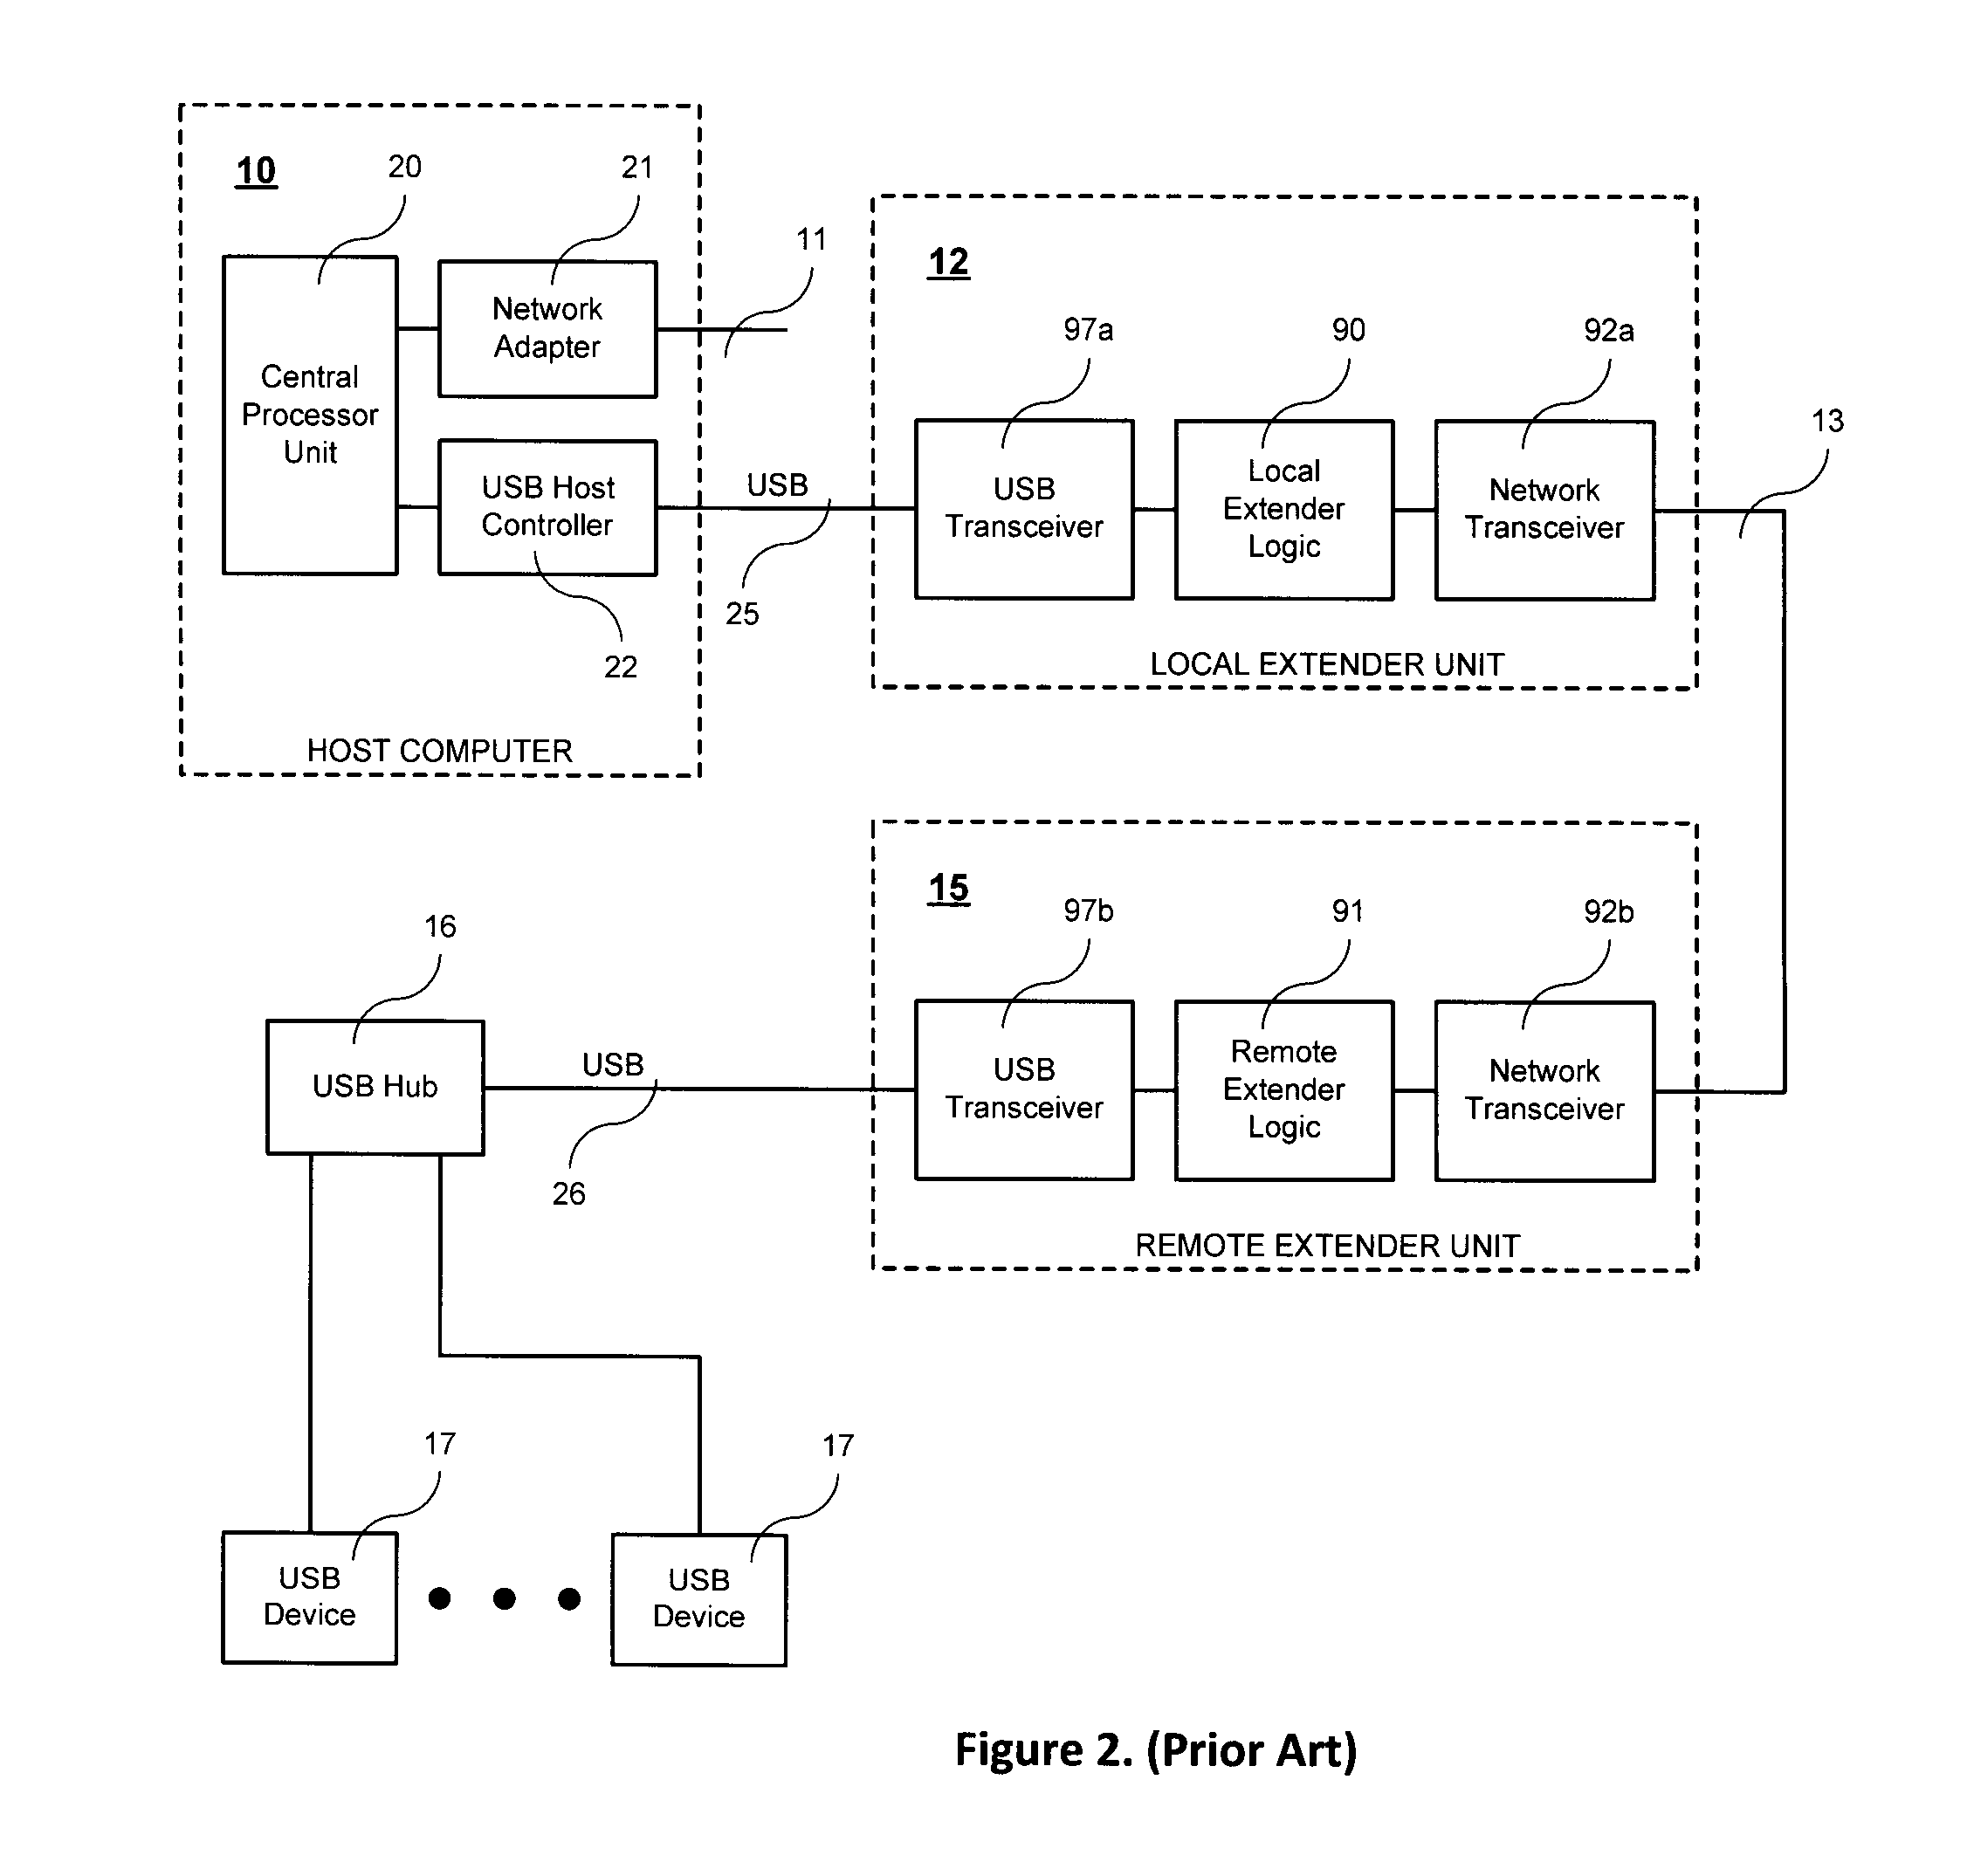 Method And Apparatus For Connecting USB Devices To a Computer